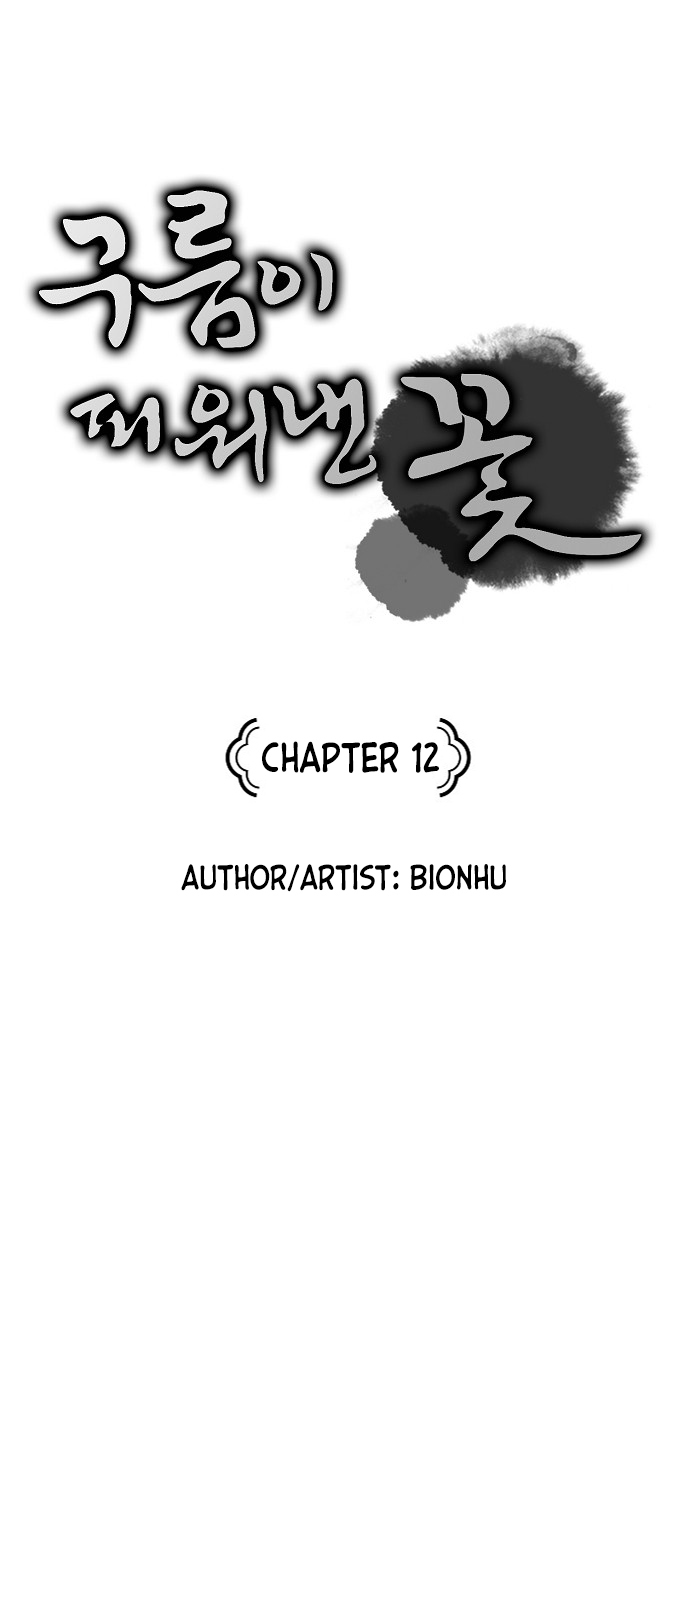 The Flower That Bloomed by a Cloud ch.12